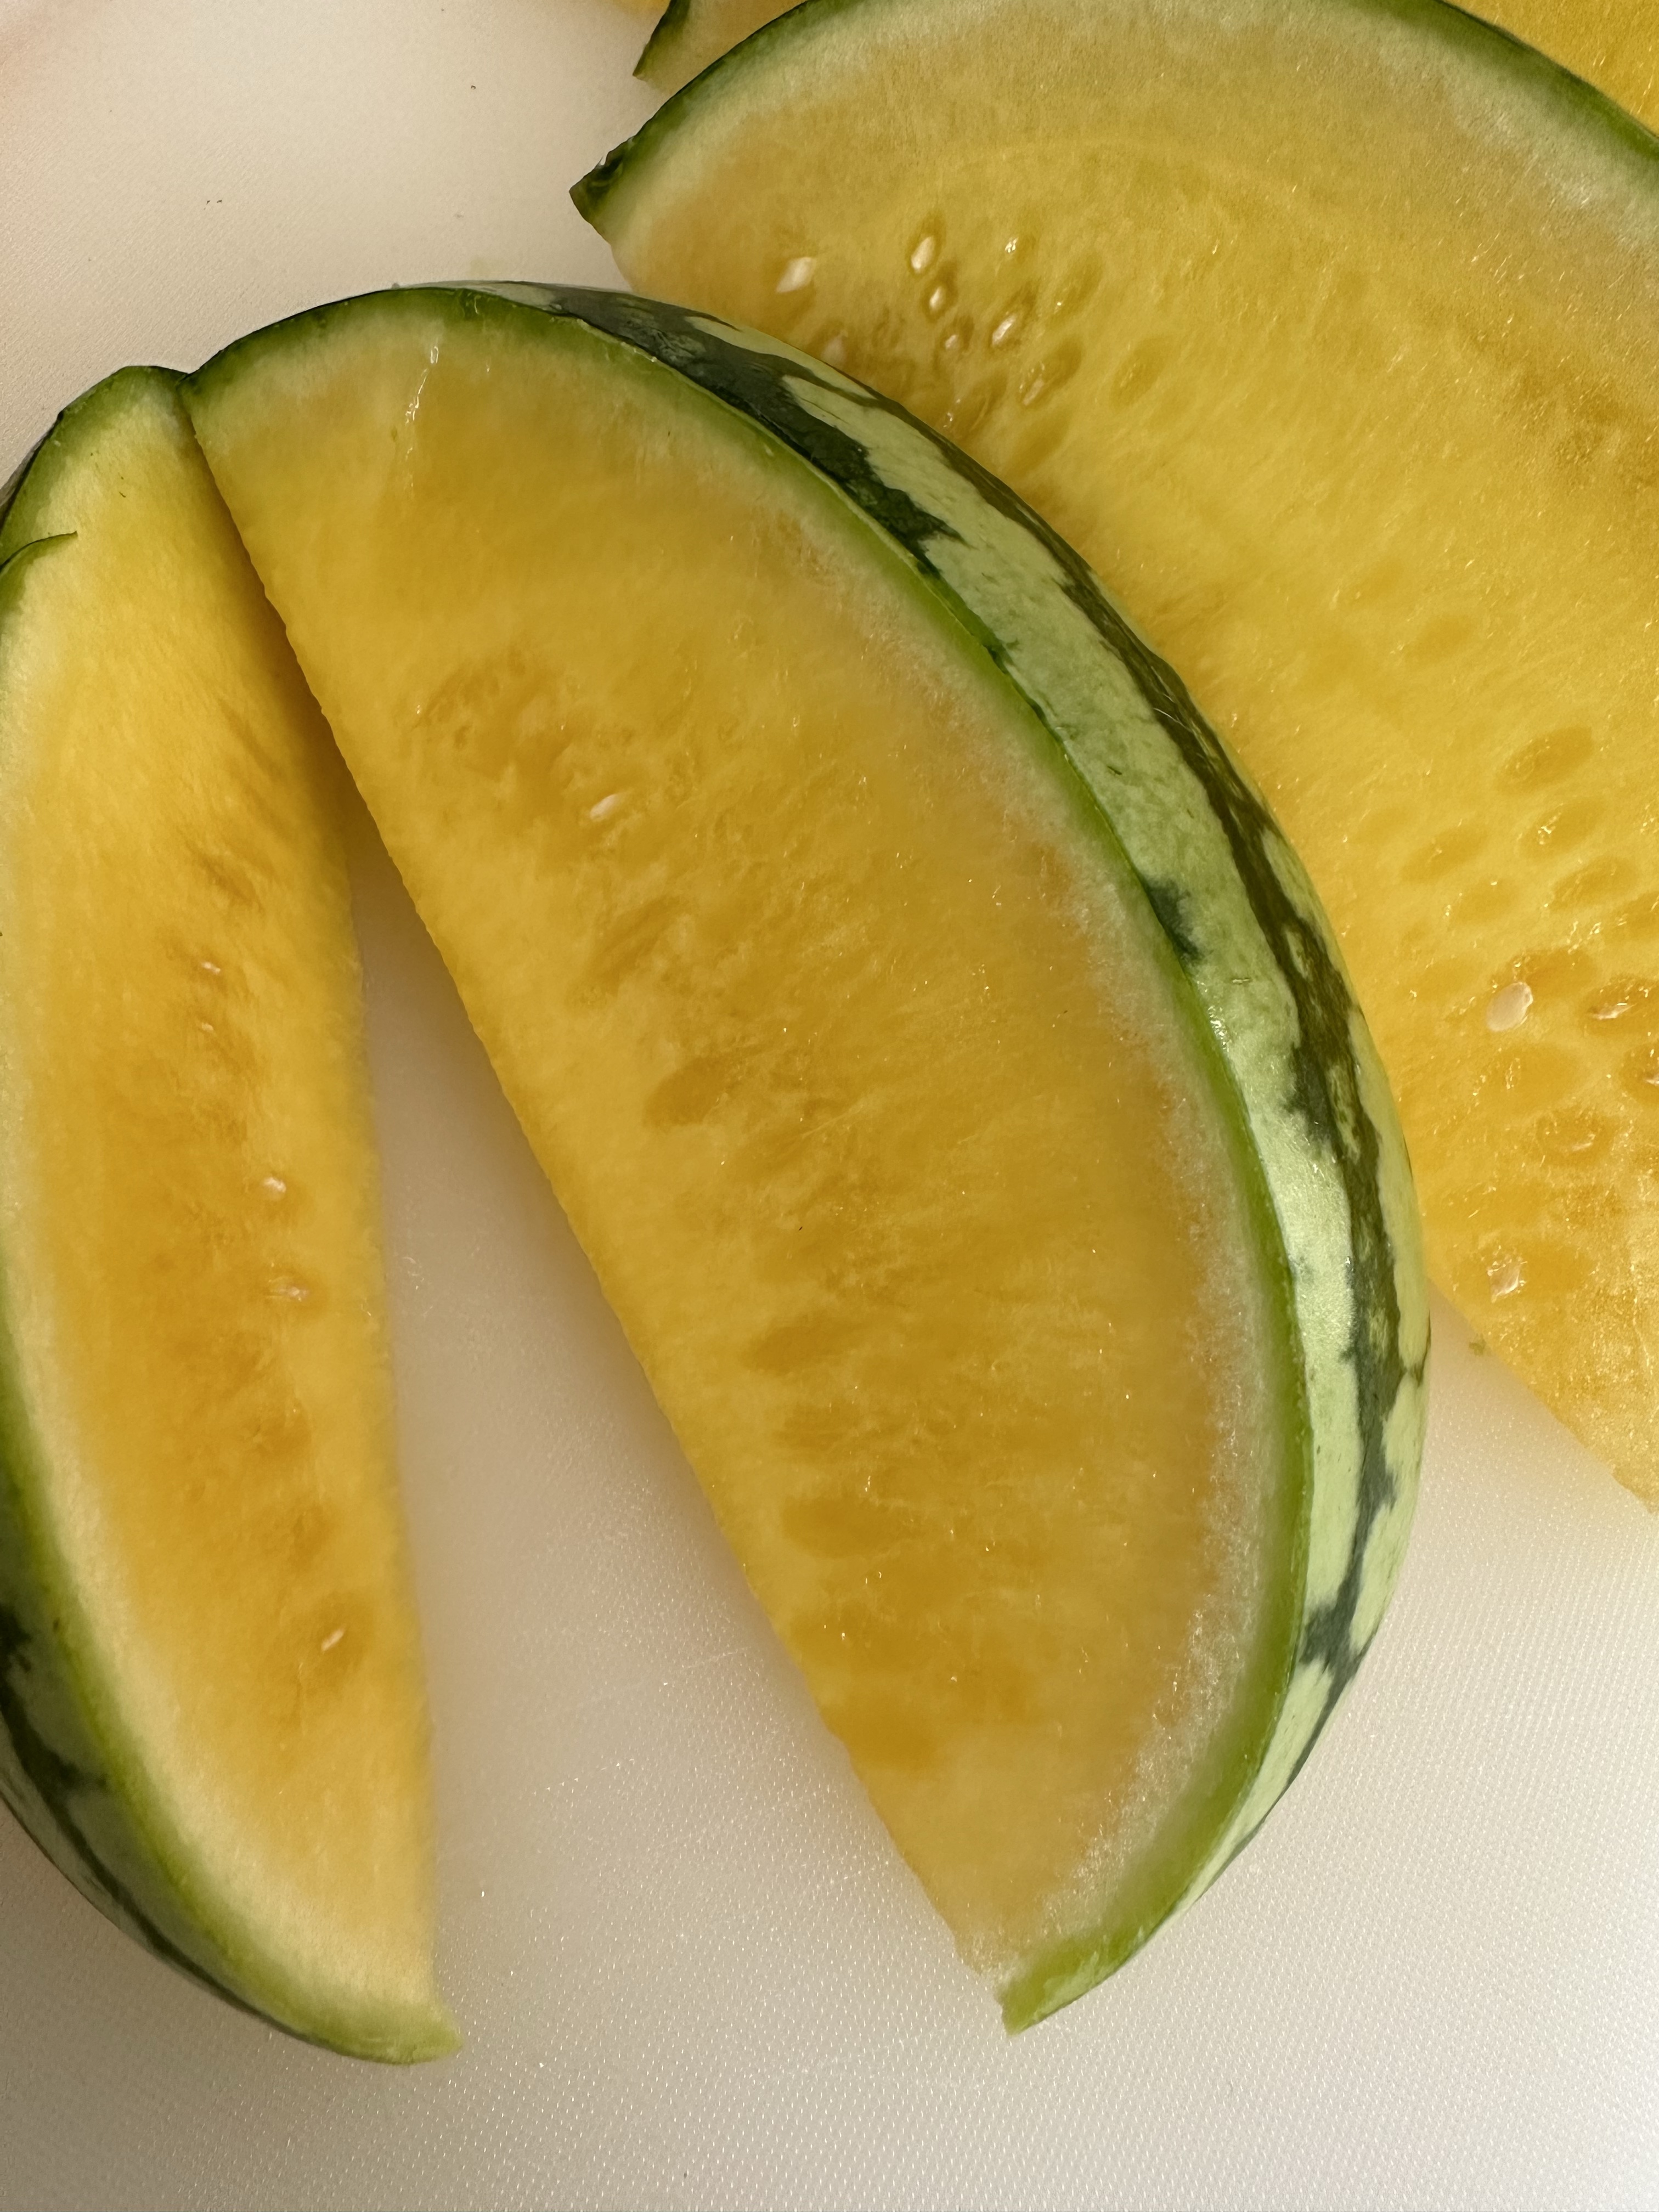 How to Grow Yellow Watermelons